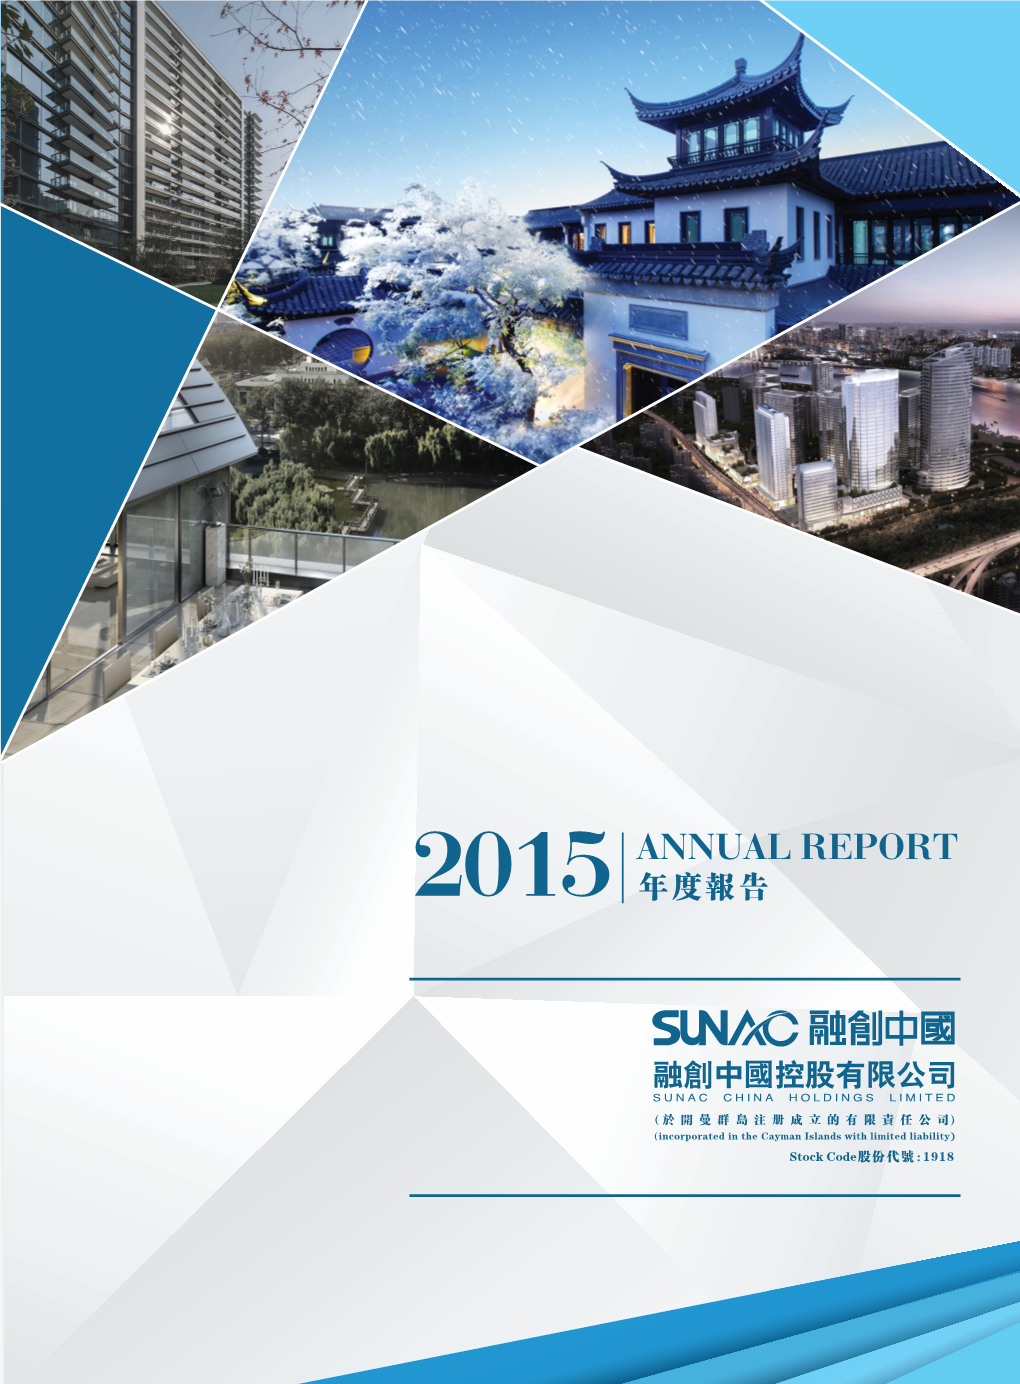 Annual Report CORPORATE INFORMATION